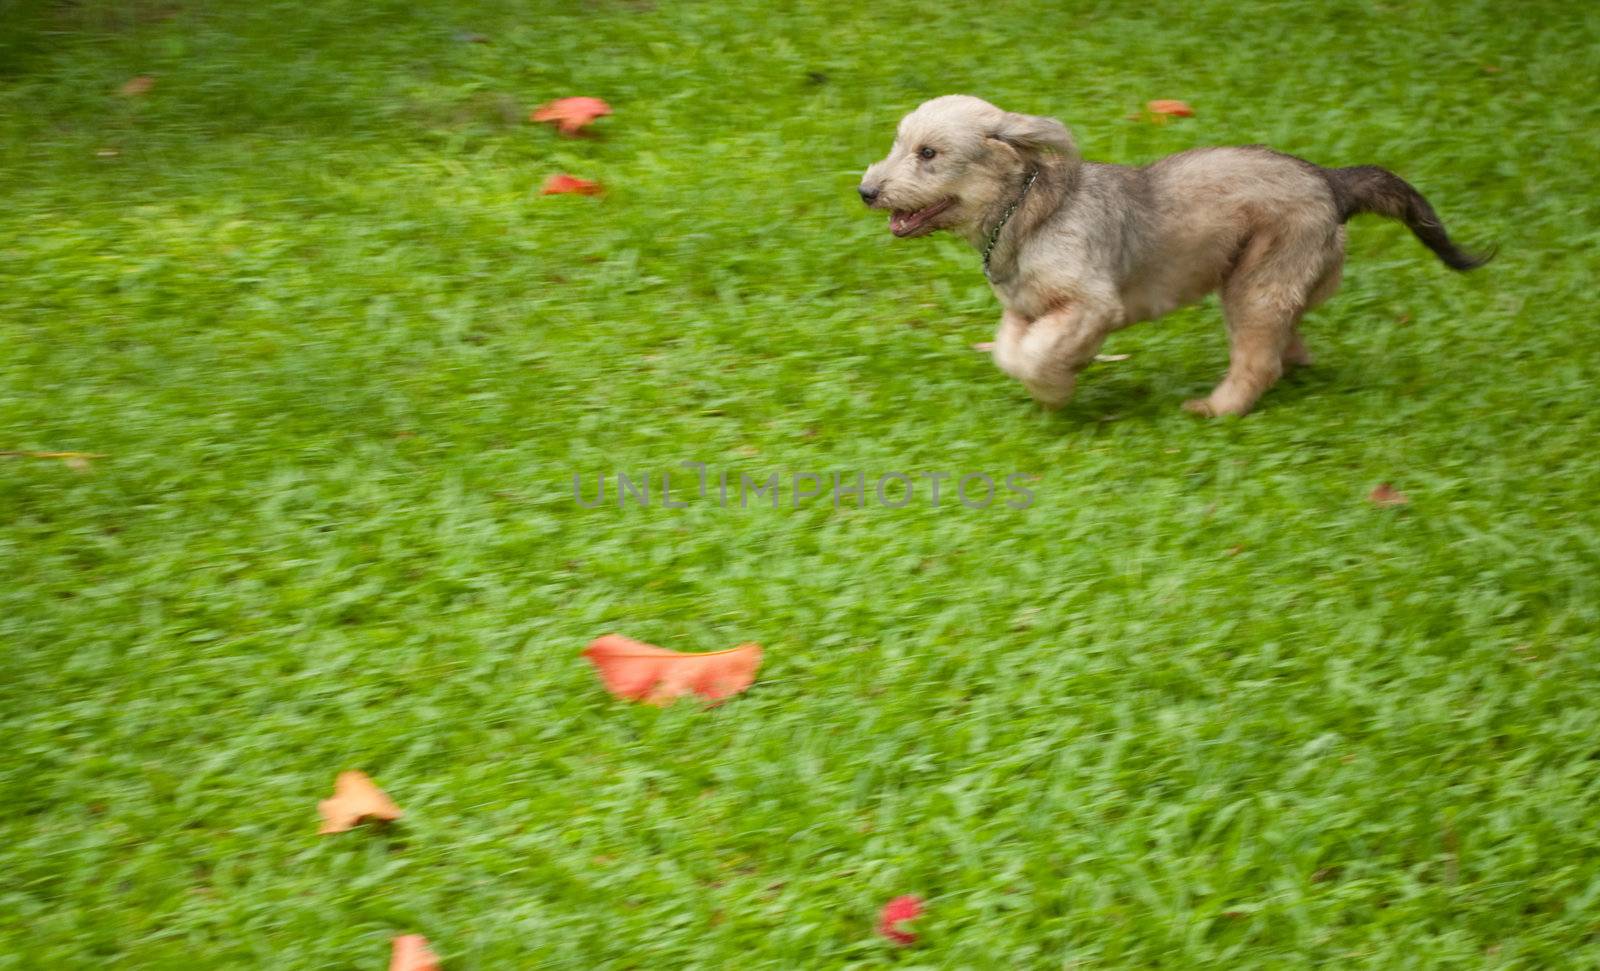 Adorable cute puppy running as if she's flying.